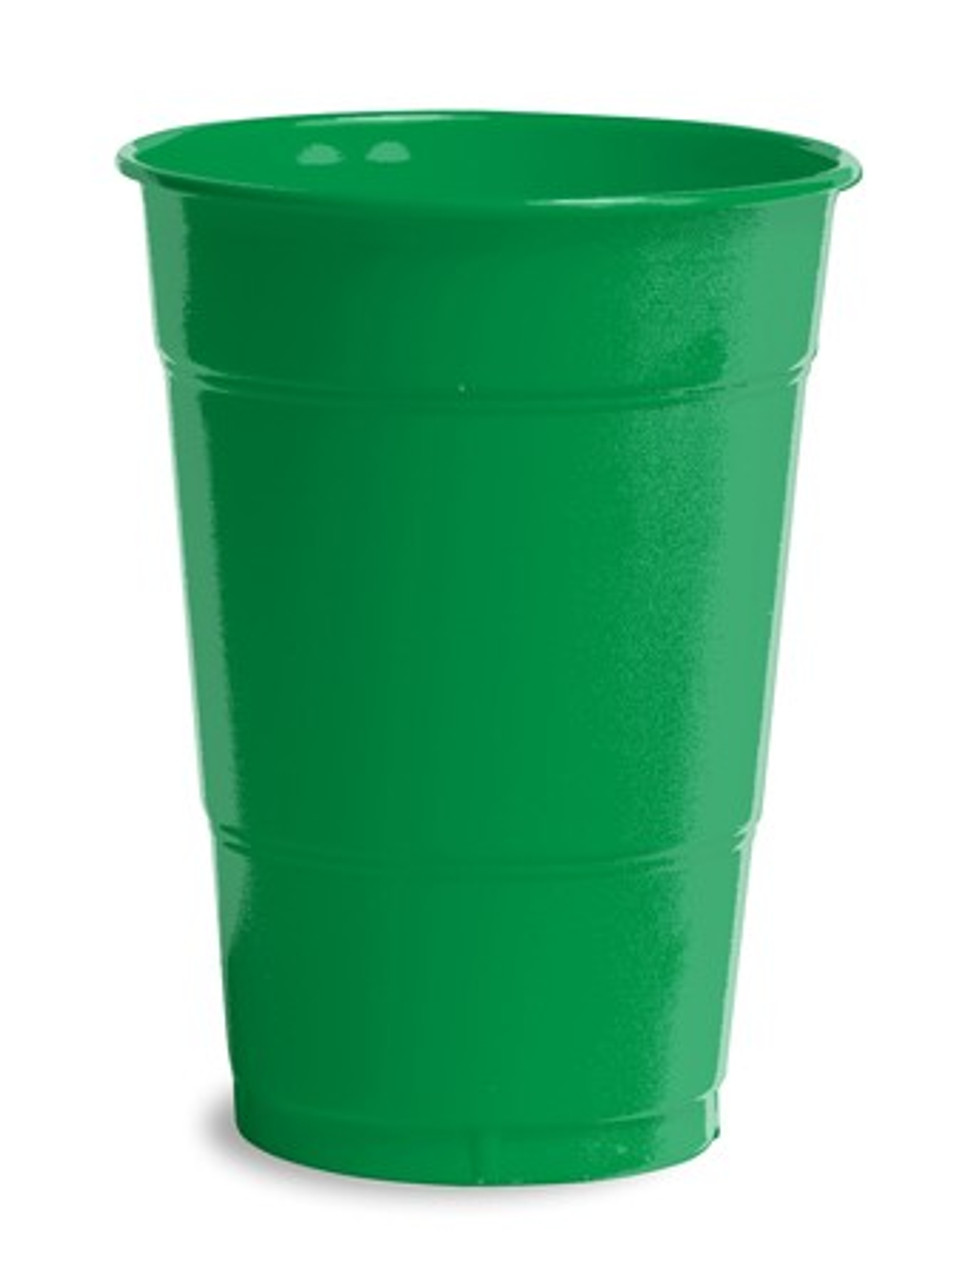 Club Pack of 240 Emerald Green Disposable Drinking Party Tumbler